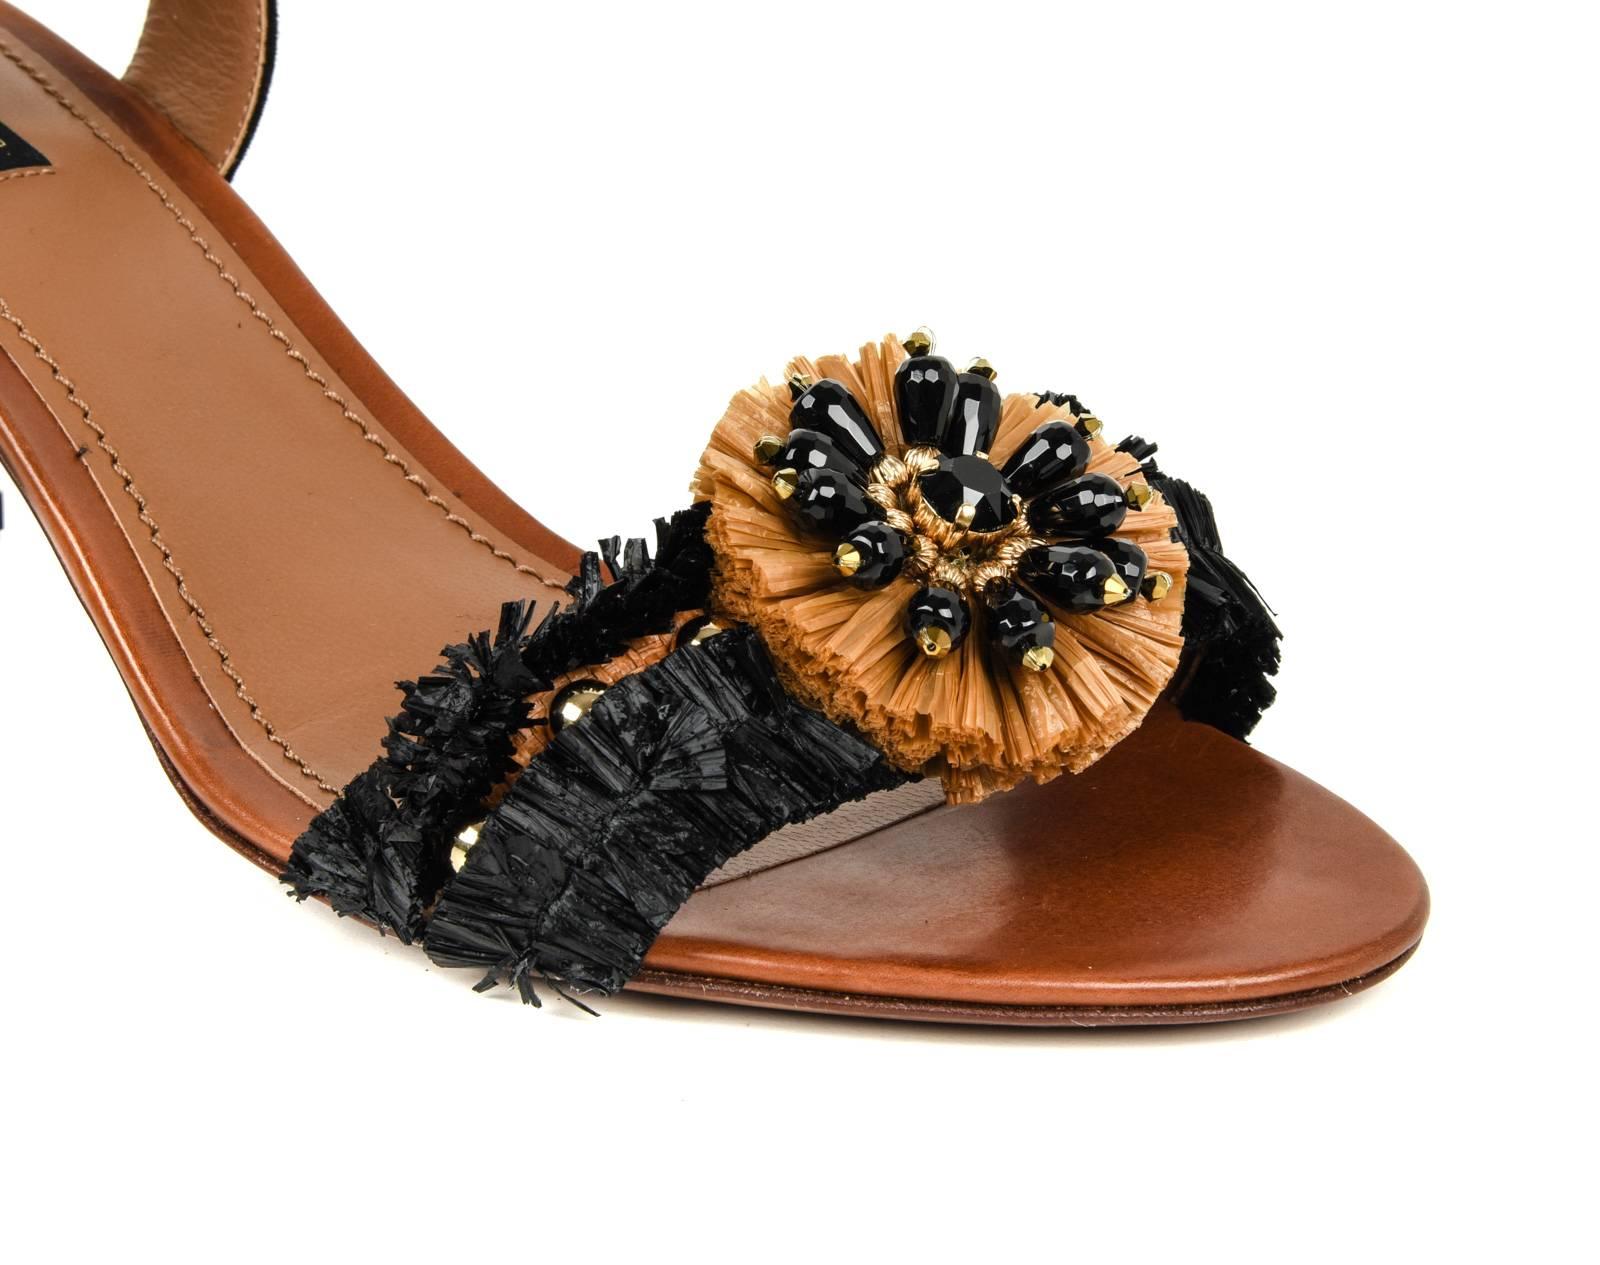 Guaranteed authentic Dolce&Gabbana black and tan raffia ankle tie sandal. 
Raffia flower with beading detail at top of shoe.
Suede ankle ties with raffia pompom ends.
Block heel is covered in black raffia.
SO pretty for summer!  
Comes with